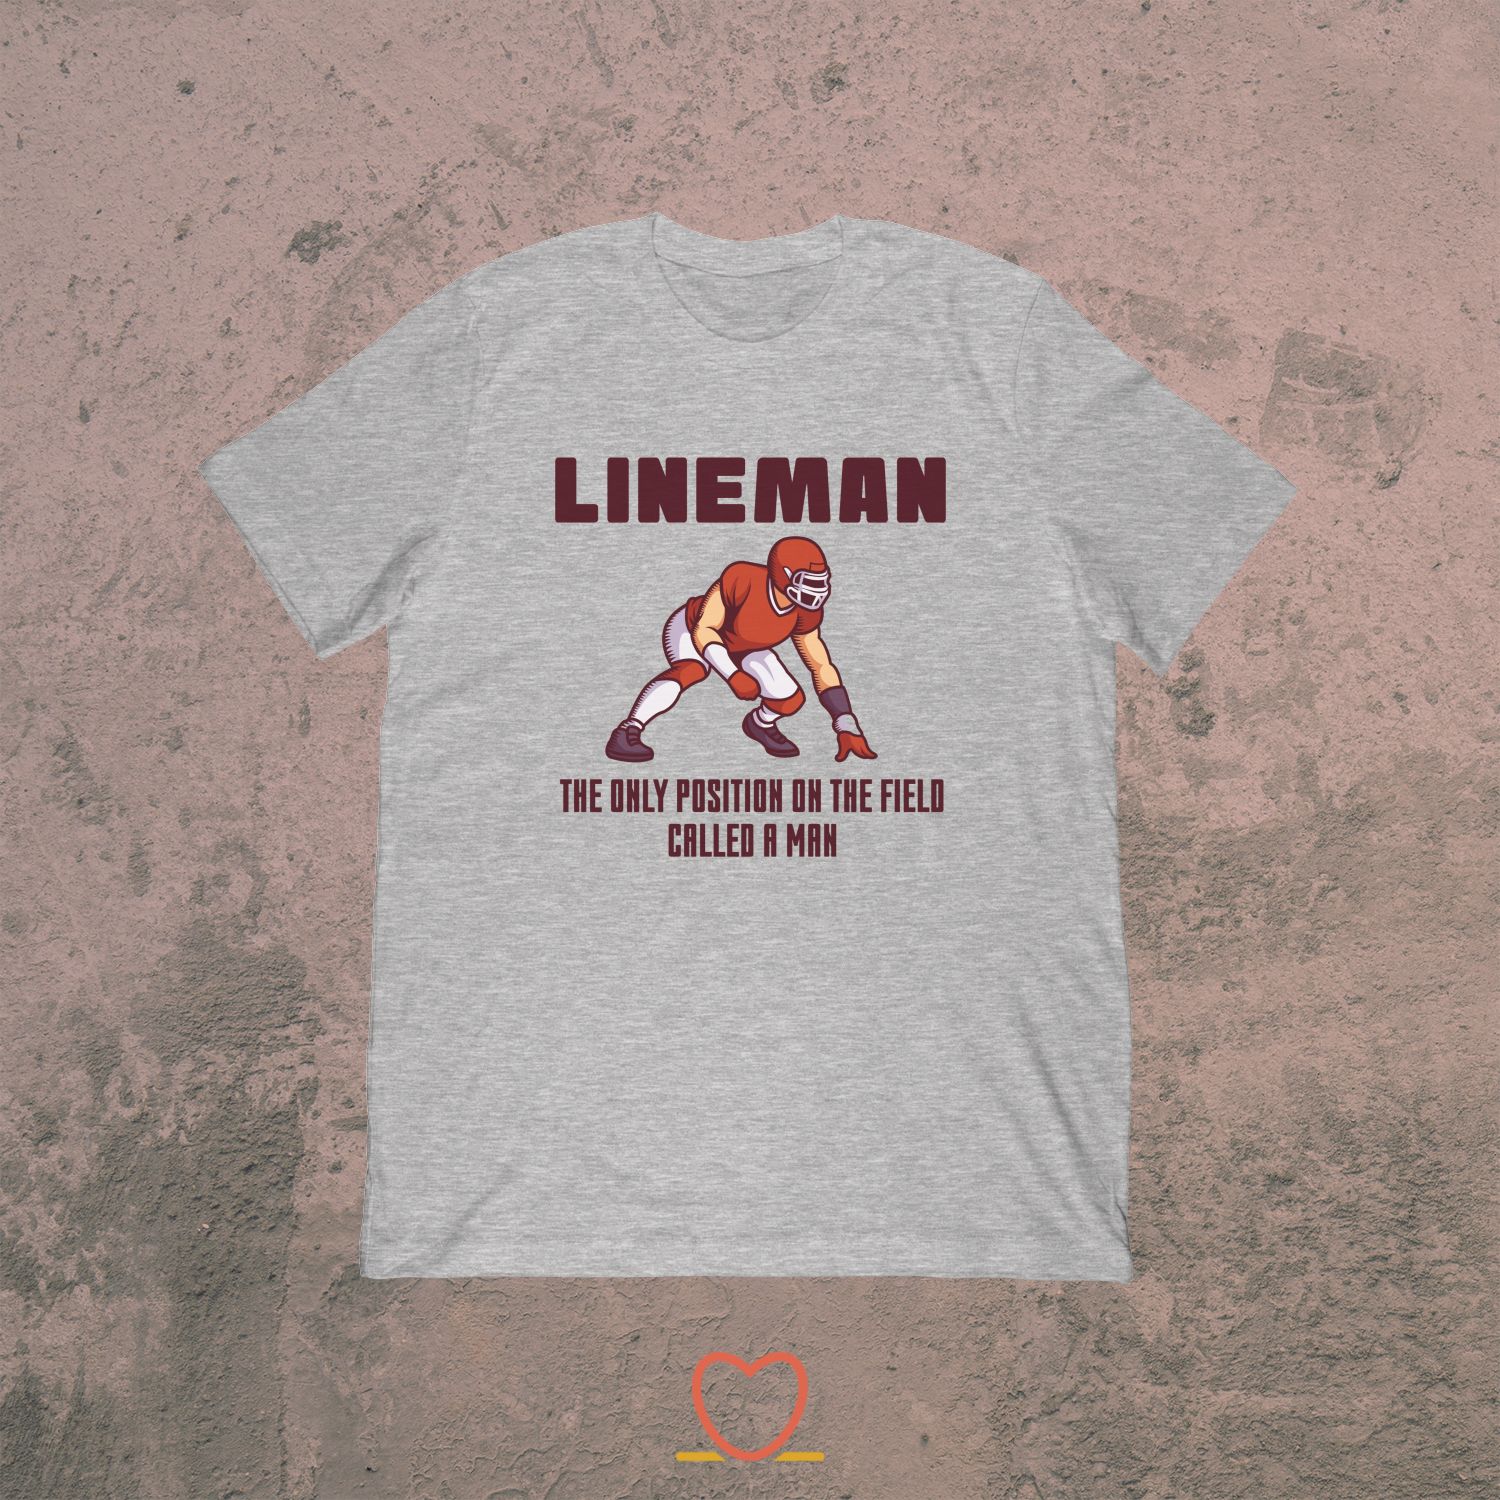 Lineman The Only Position Called A Man – Lineman Football Tee